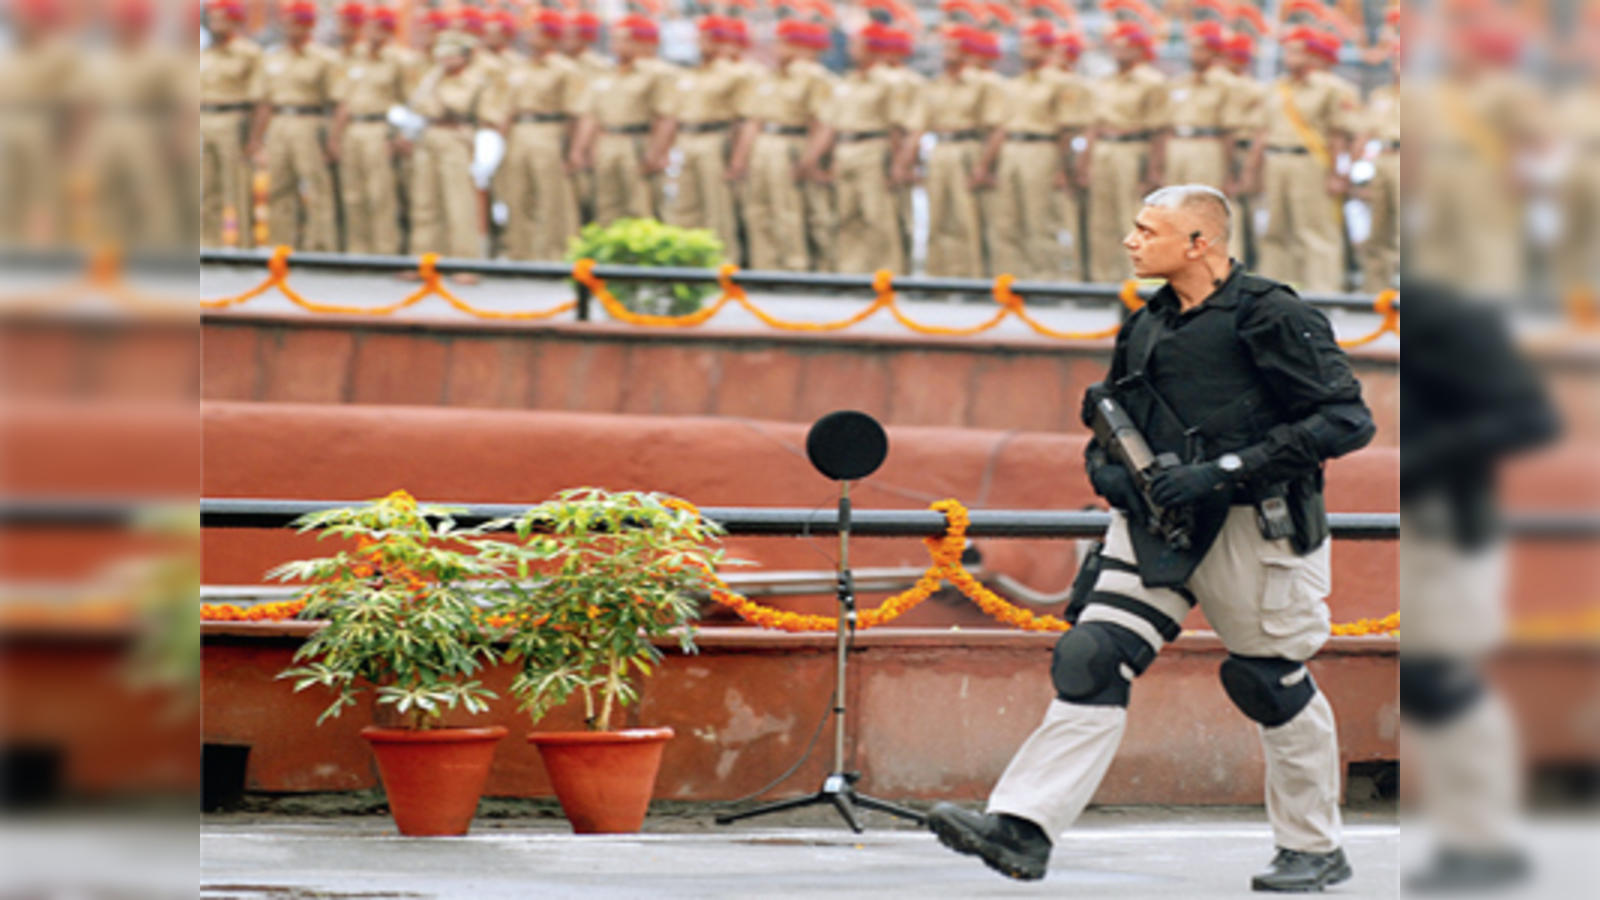 The cover story: What makes the SPG India's finest special protection force